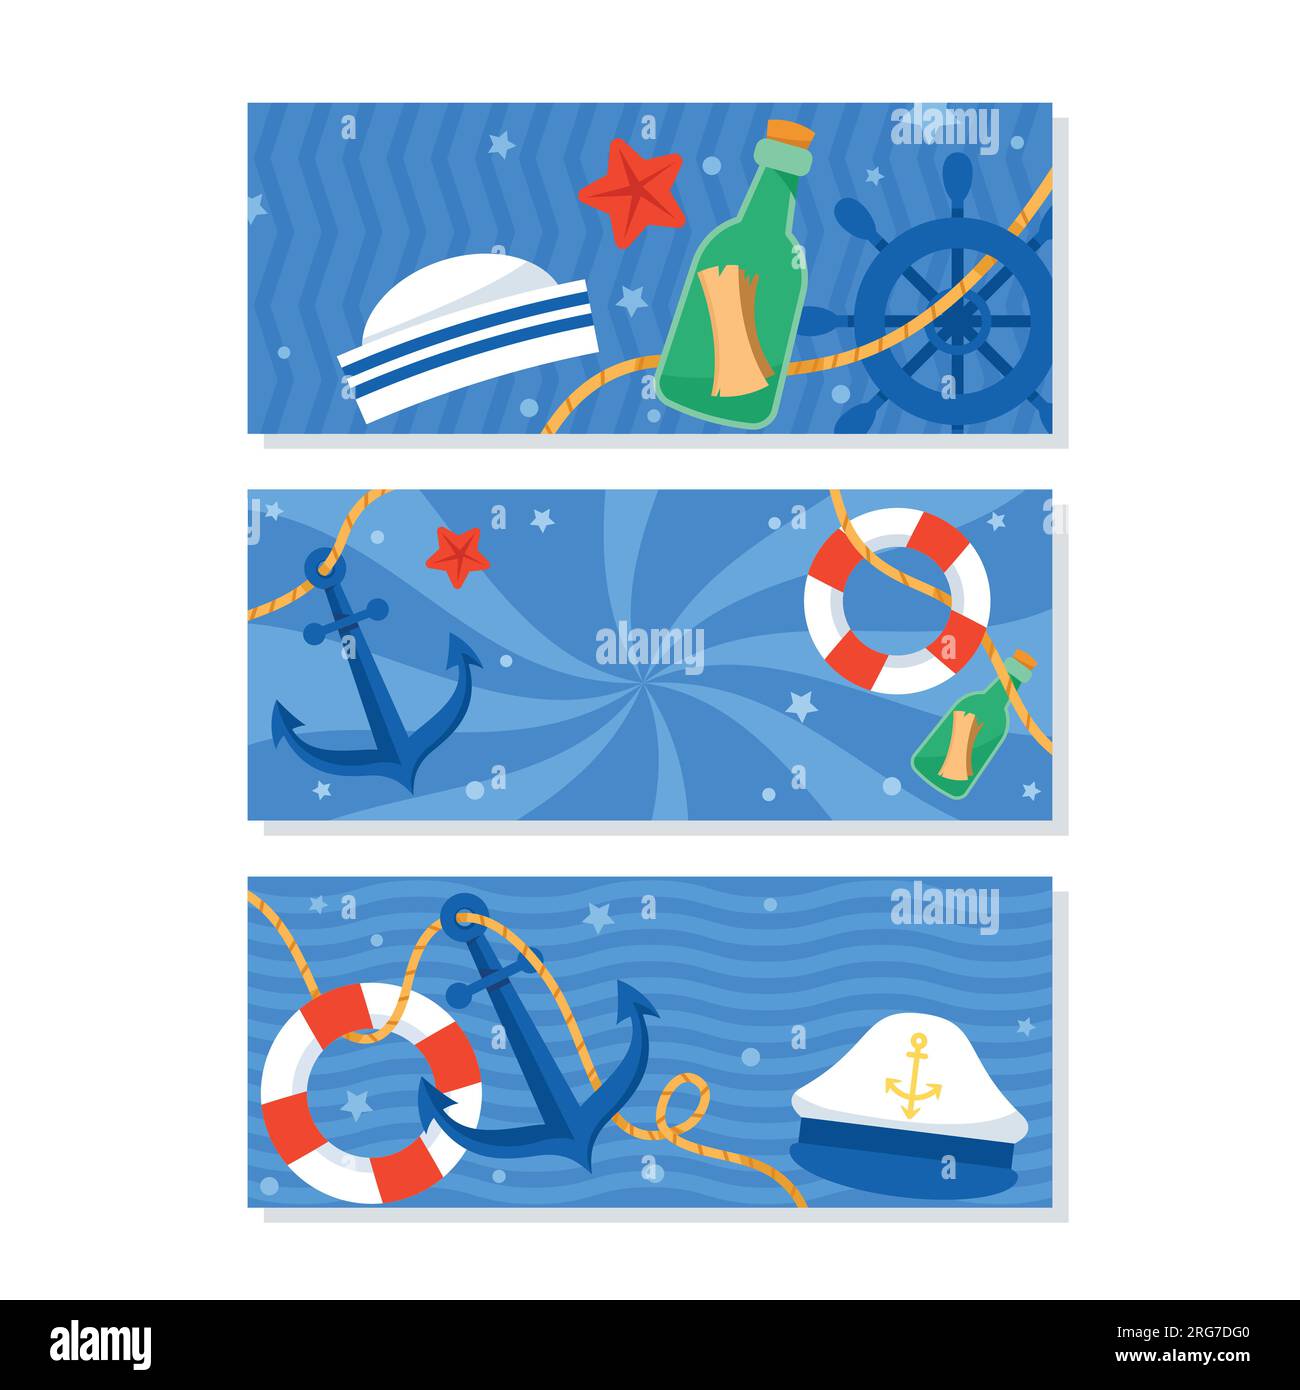 Template banner design for sailor marine theme Stock Vector Image